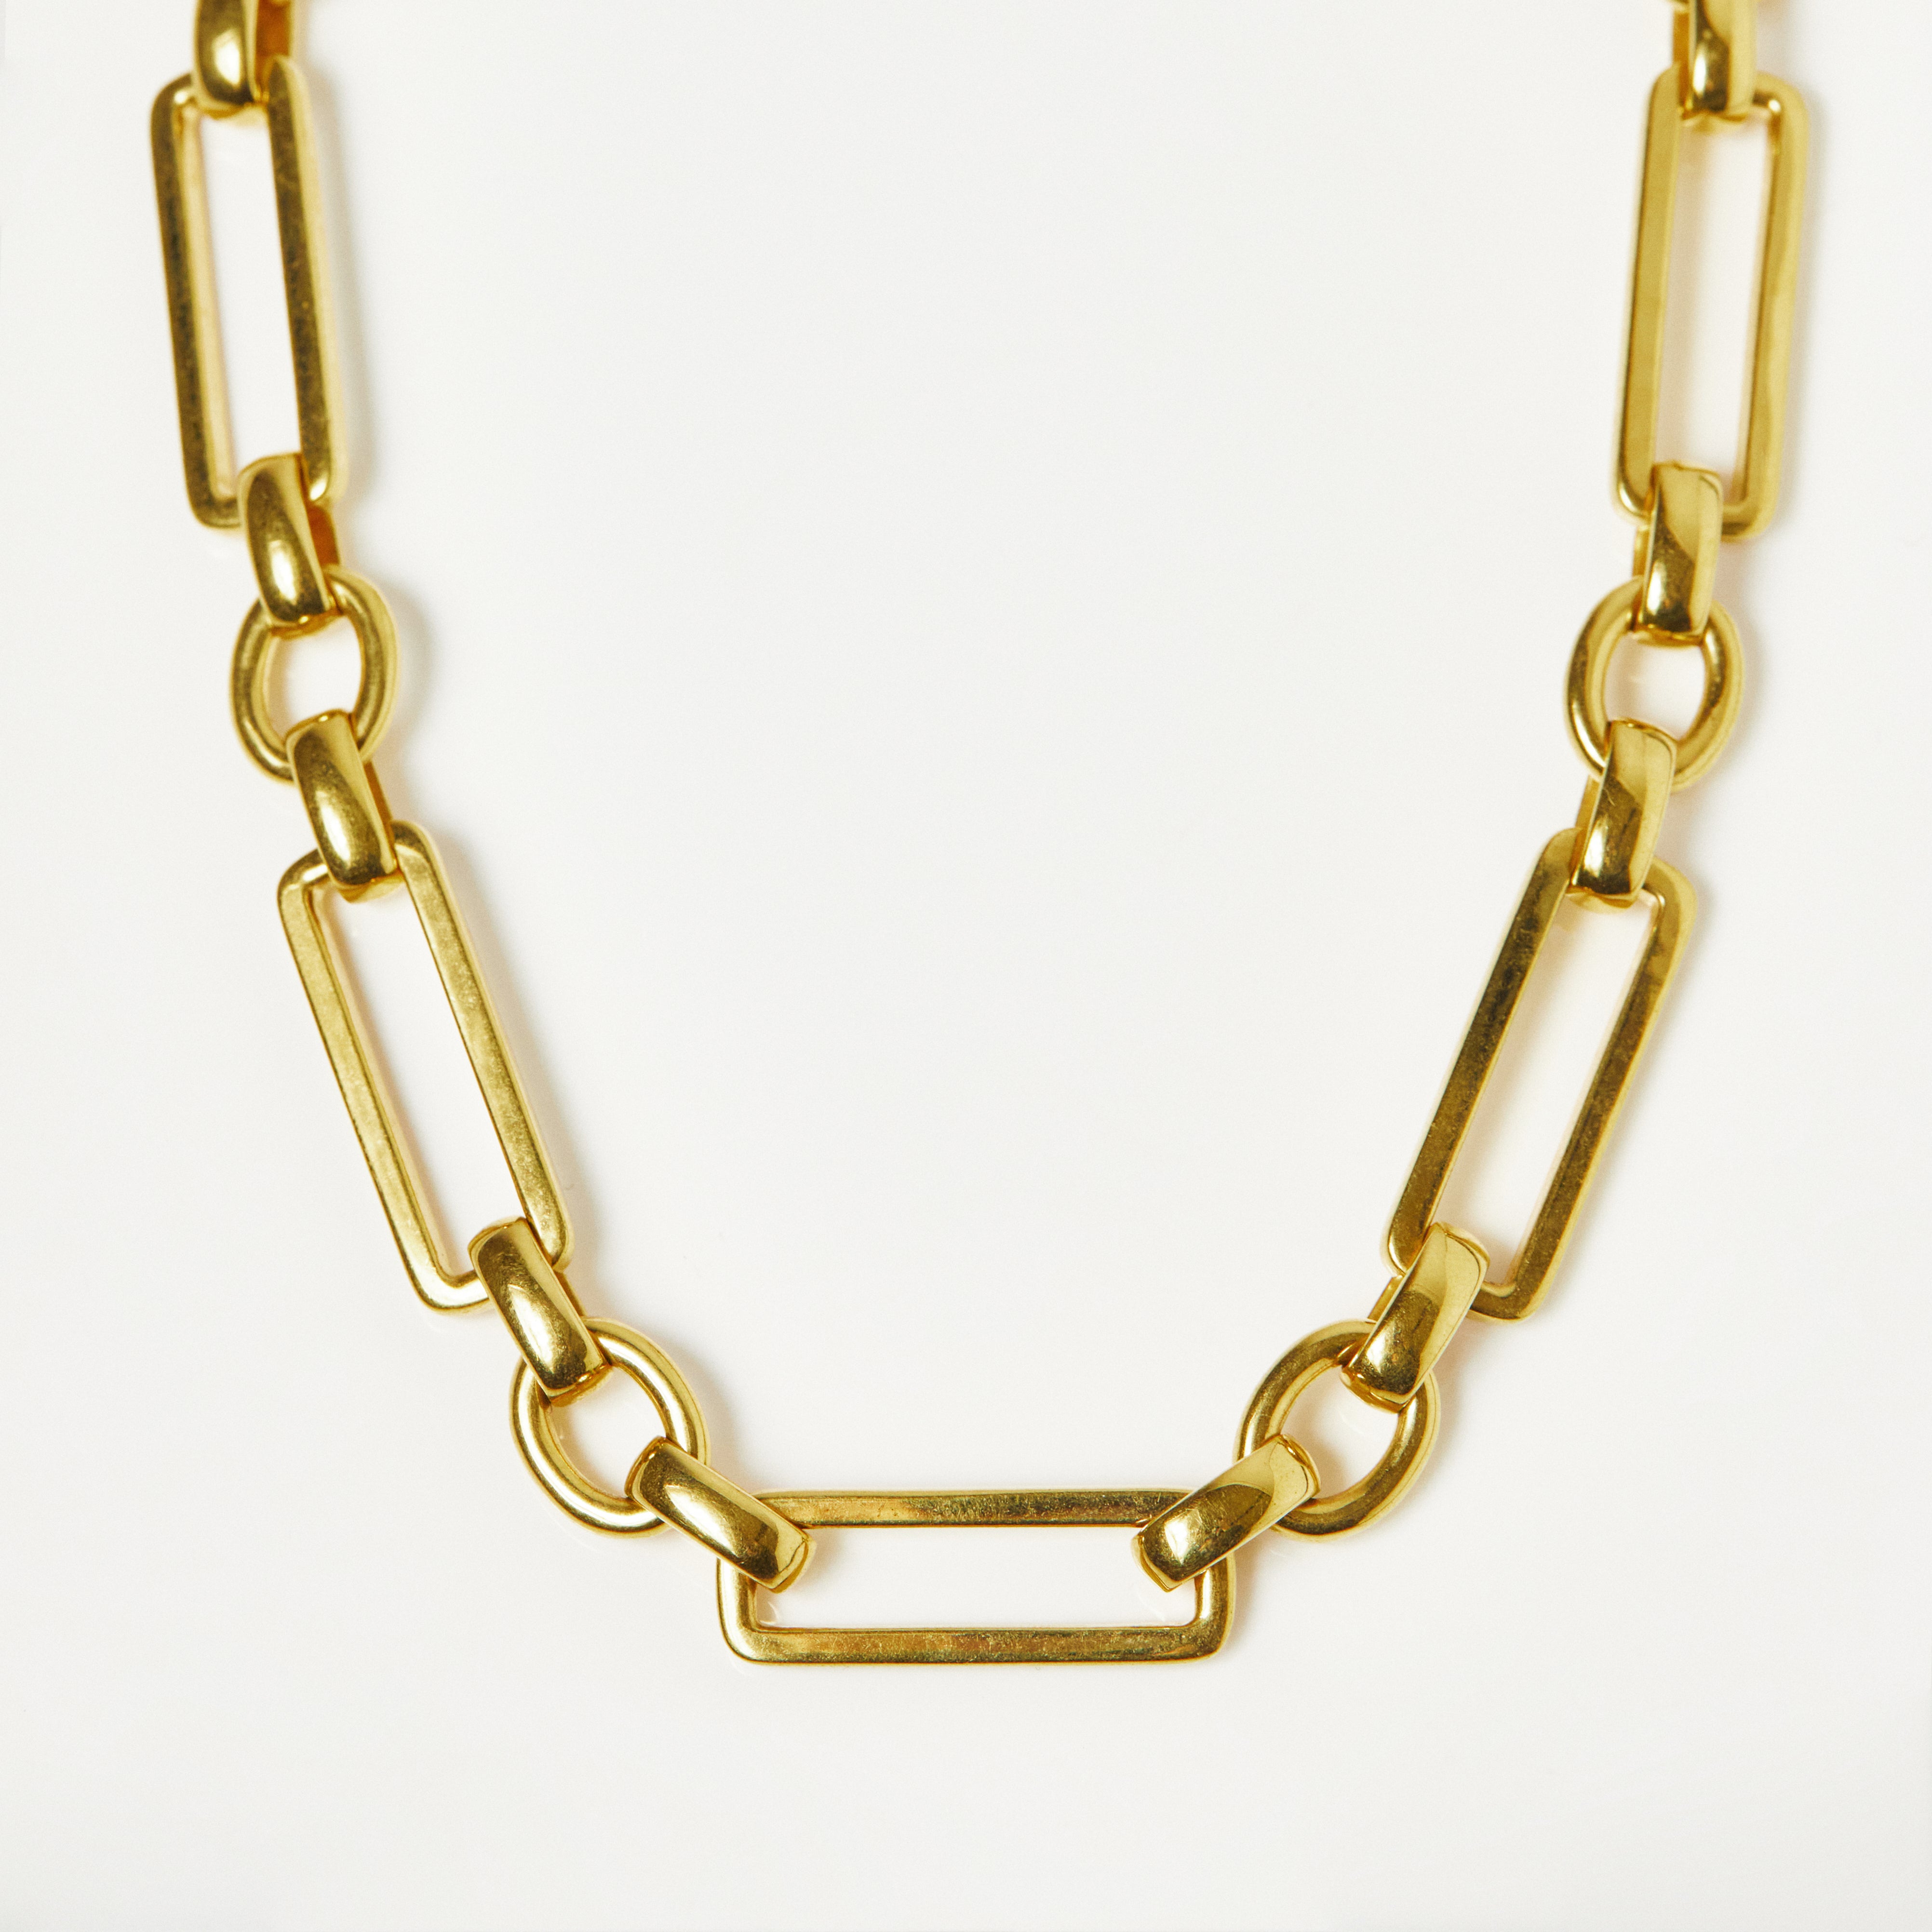 Large Size Titanium Chain Necklace In Curb Link Style - TitaniumStyle.com